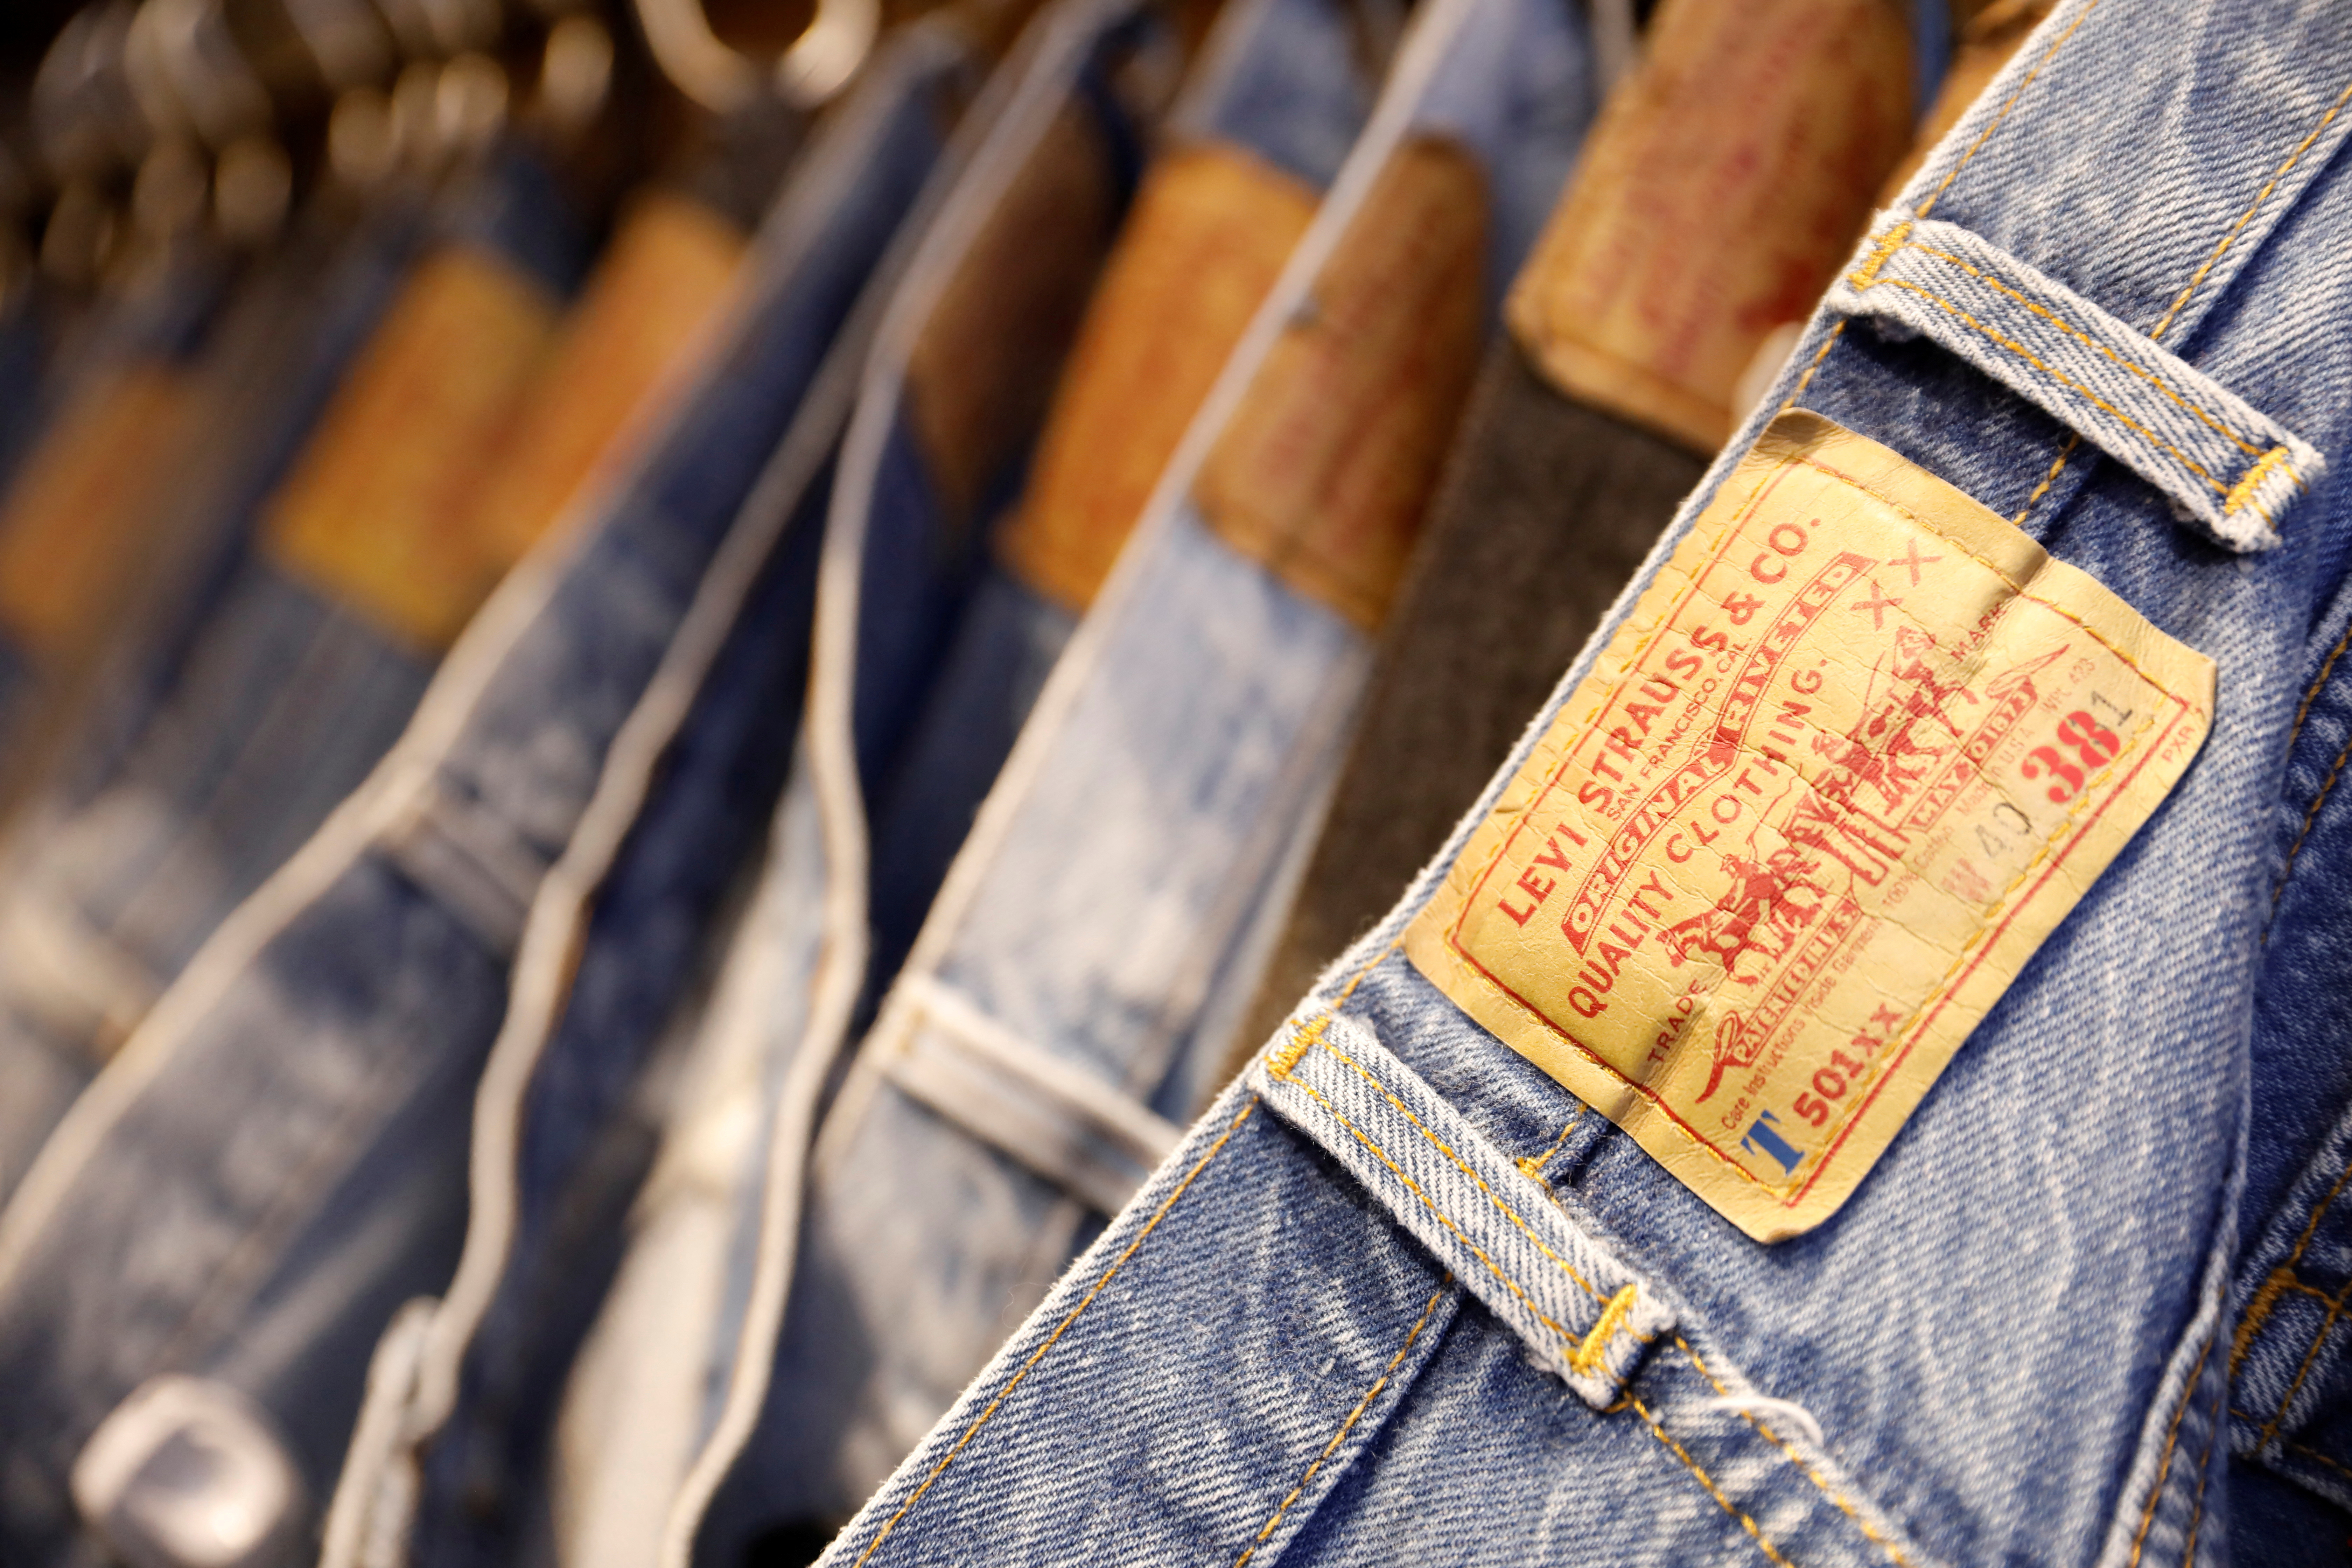 Ødelægge Litteratur ting Levi Strauss to cut prices as weak consumer spending hits outlook | Reuters